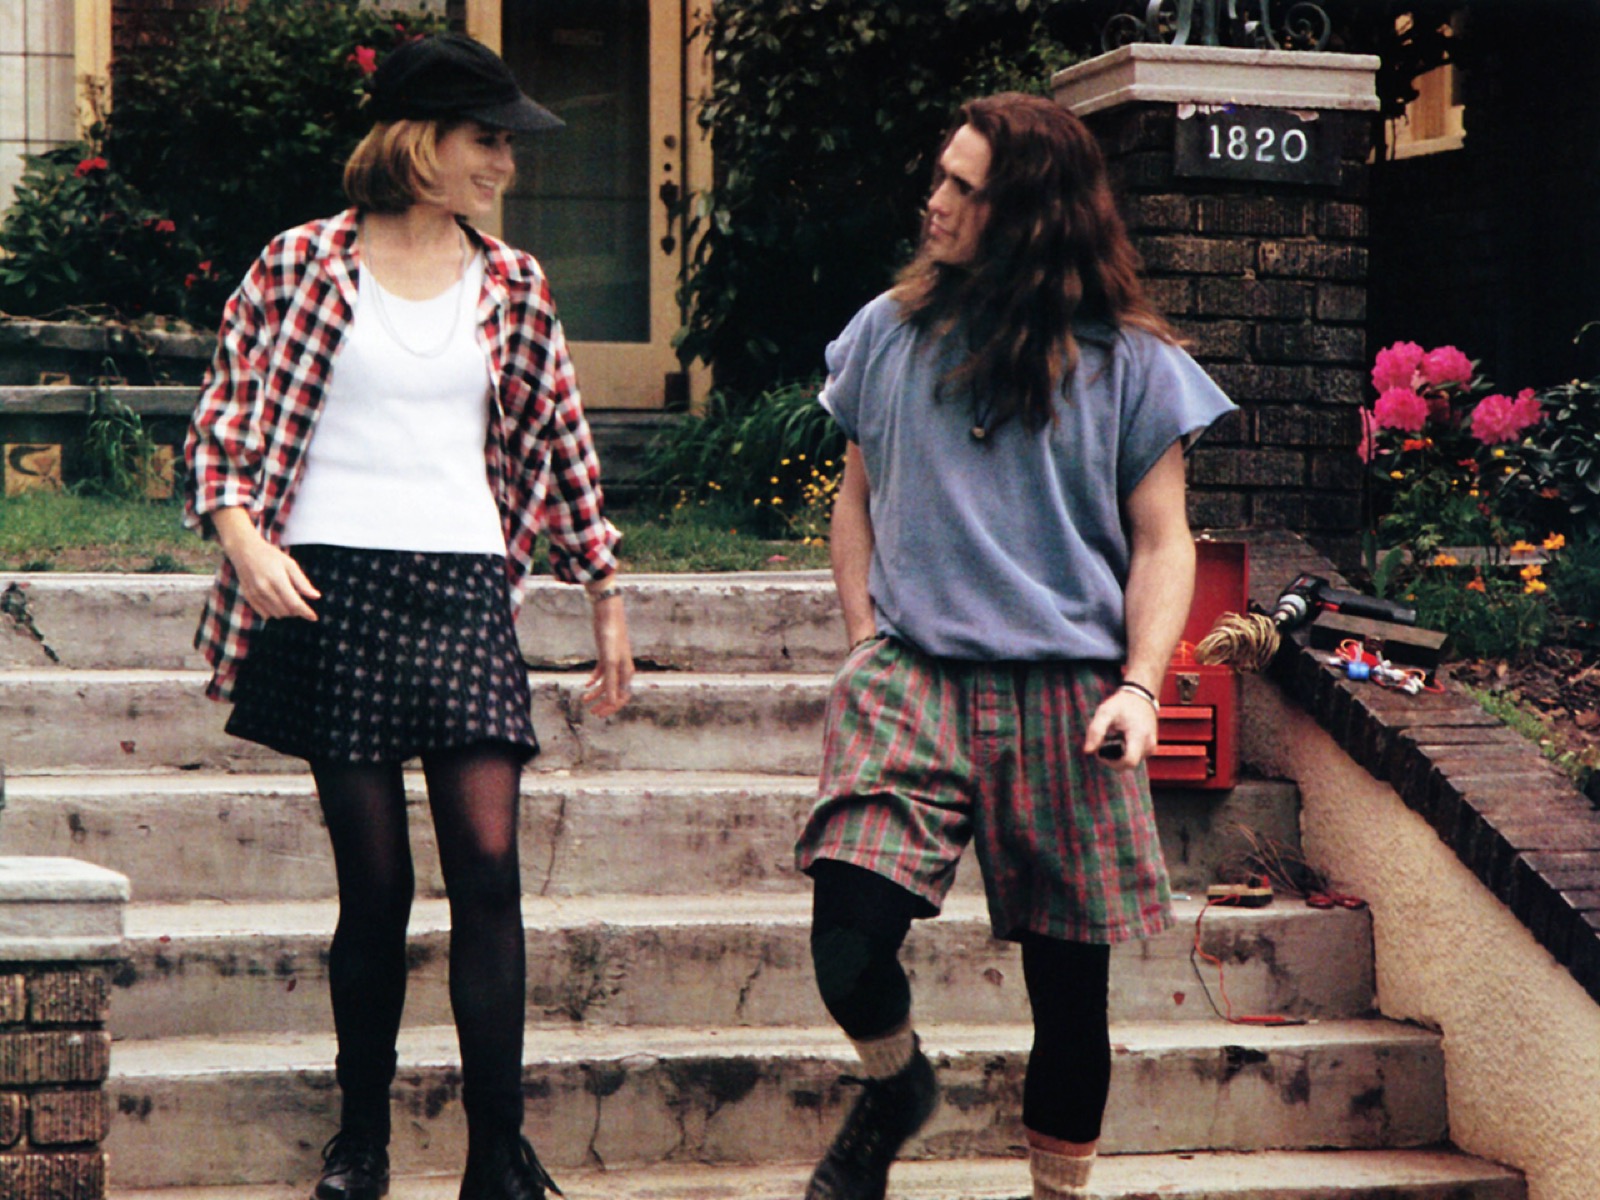 Decide Which Retro Fads You Will Bring Back and We’ll Guess Your Age Accurately 1990s grunge fashion